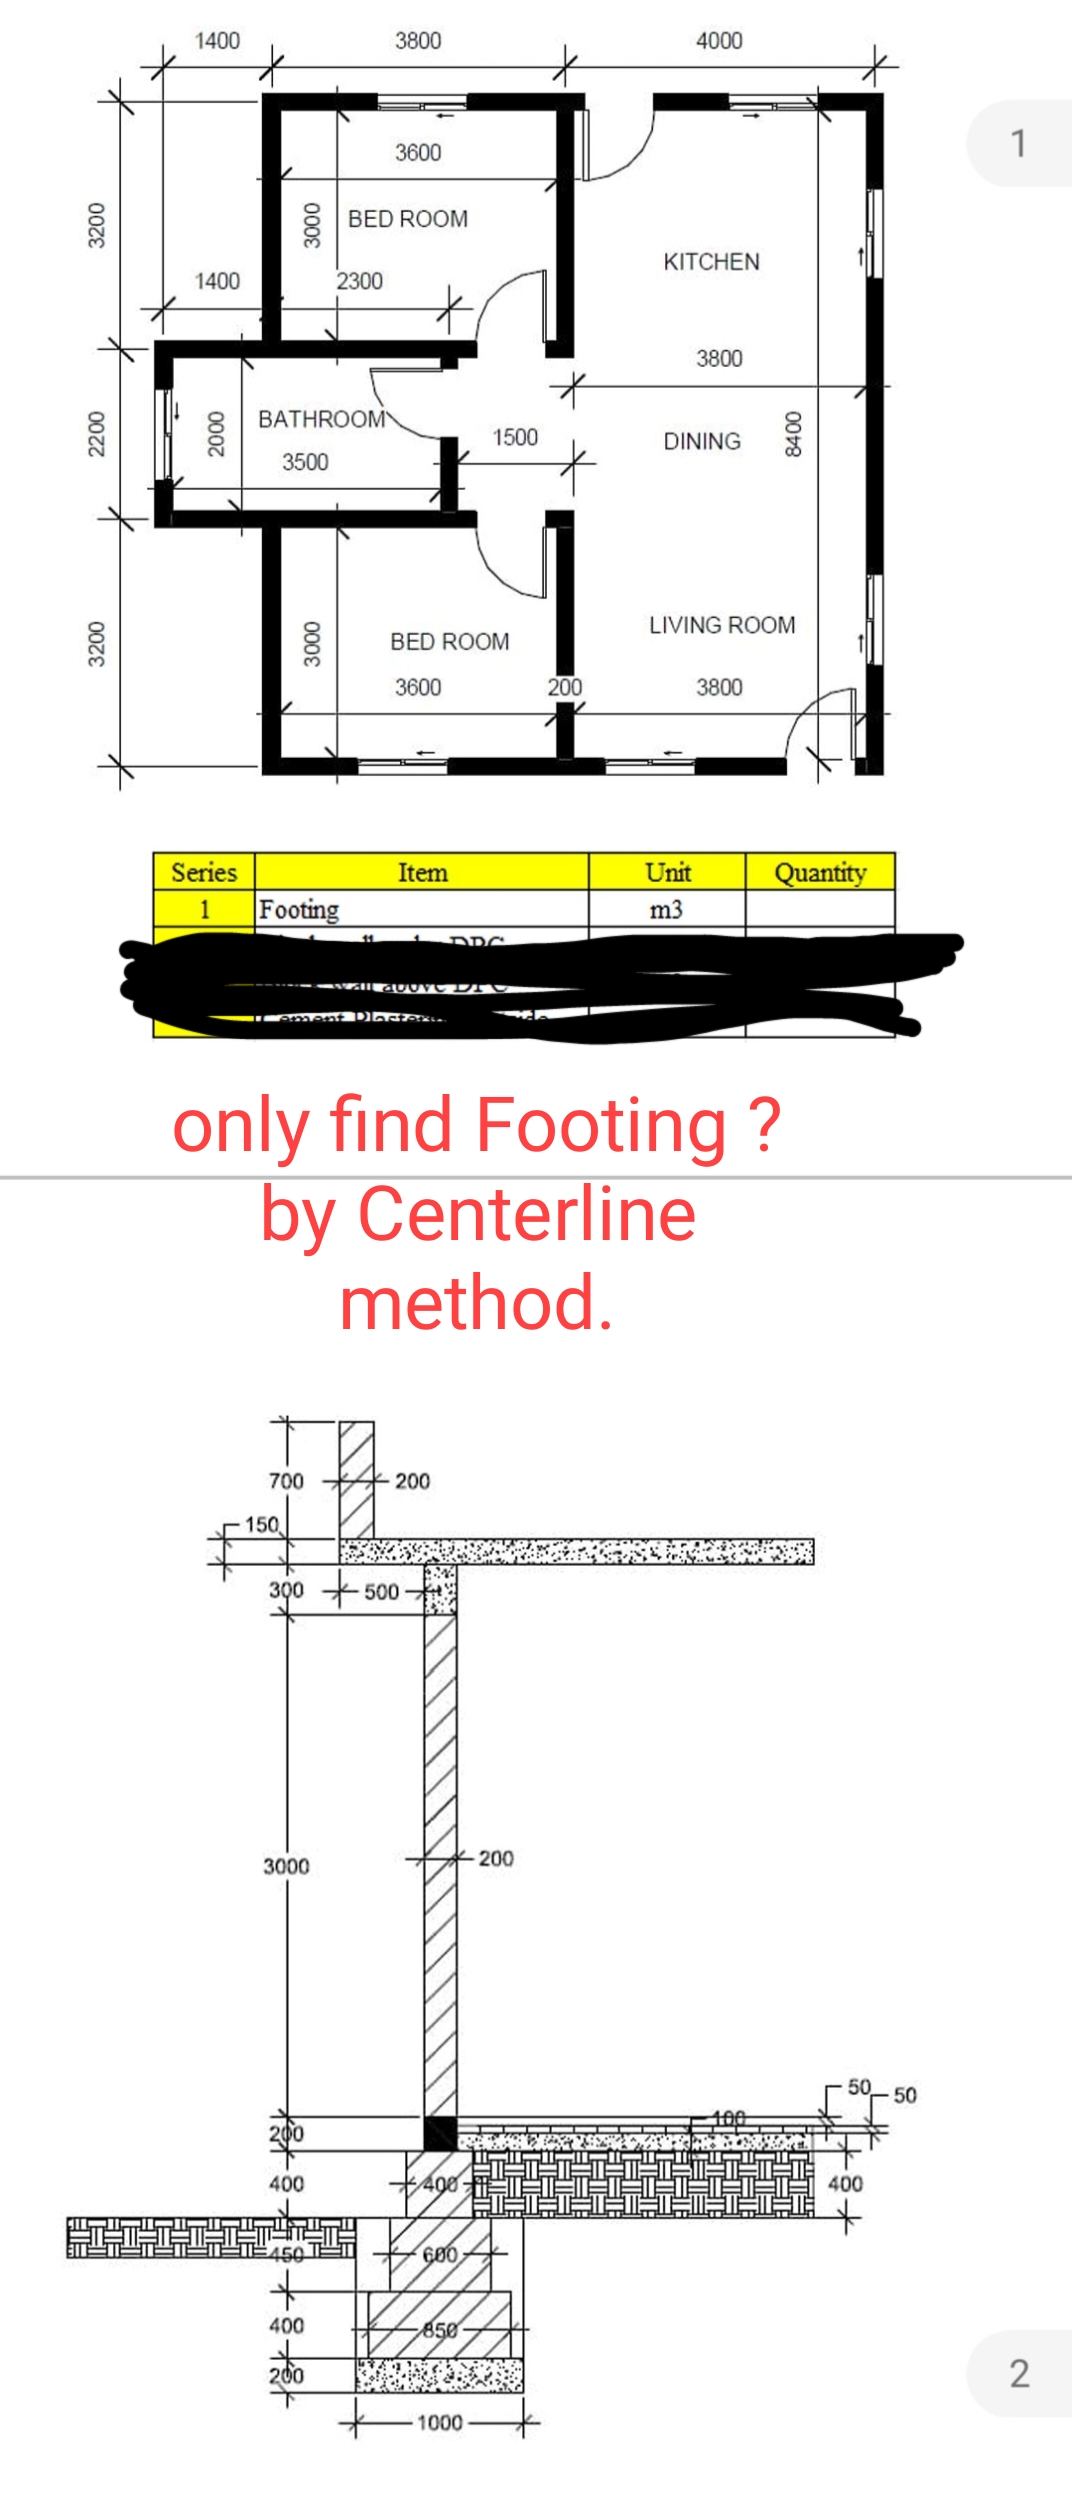 1400
3800
4000
3600
1
BED ROOM
KITCHEN
1400
2300
3800
BATHROOM
1500
DINING
3500
LIVING ROOM
BED ROOM
3600
200
3800
Series
Item
Unit
Quantity
1
|Footing
m3
only find Footing ?
by Centerline
method.
700 200
150
300 + 500 -
3000
200
50
200
400
400
60
400
850
200
2
1000
008
000
000
0007
2200
